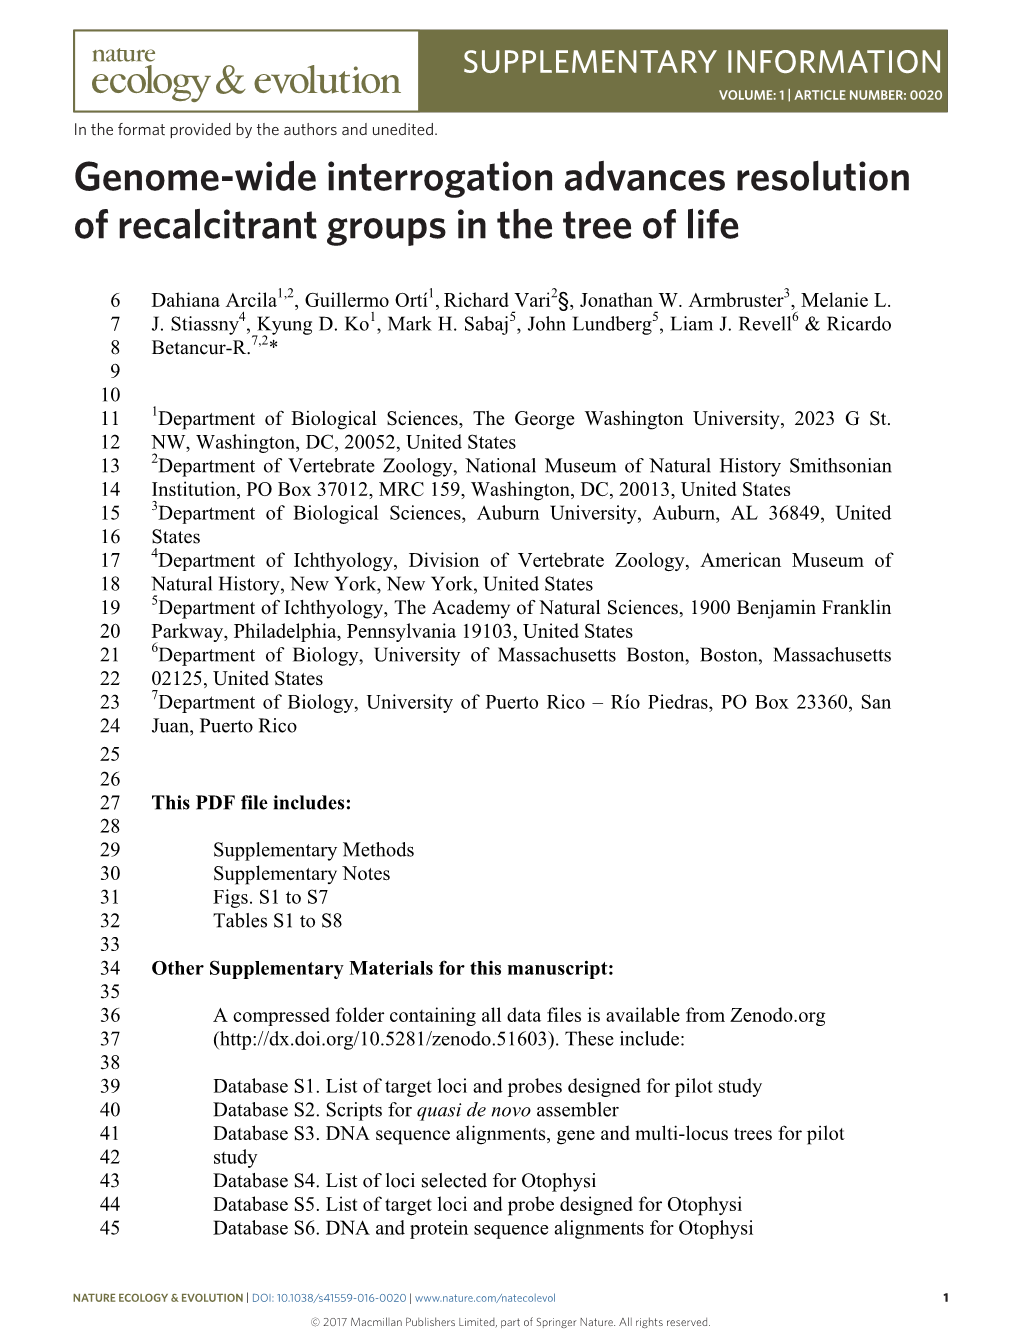 Genome-Wide Interrogation Advances Resolution of Recalcitrant Groups In